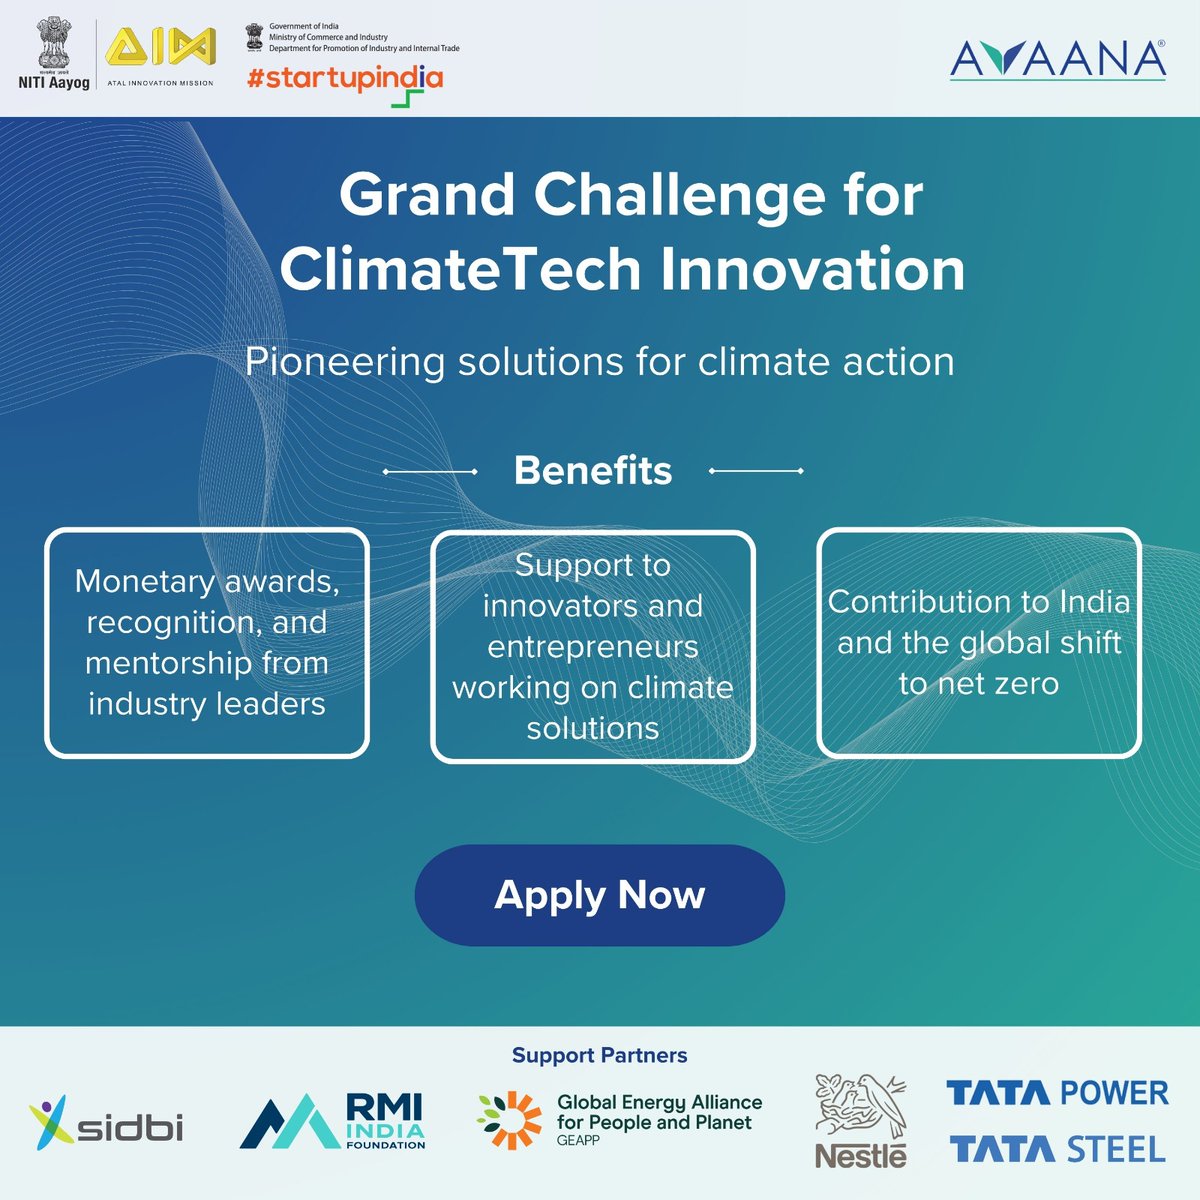 Calling all startups innovating in Climatetech to apply for the Grand Challenge for ClimateTech Innovation! 

Launched by @avaanacapital , in partnership with @startupindia and #AIM , this challenge aims to identify and support entrepreneurs building across 7 themes shared below.